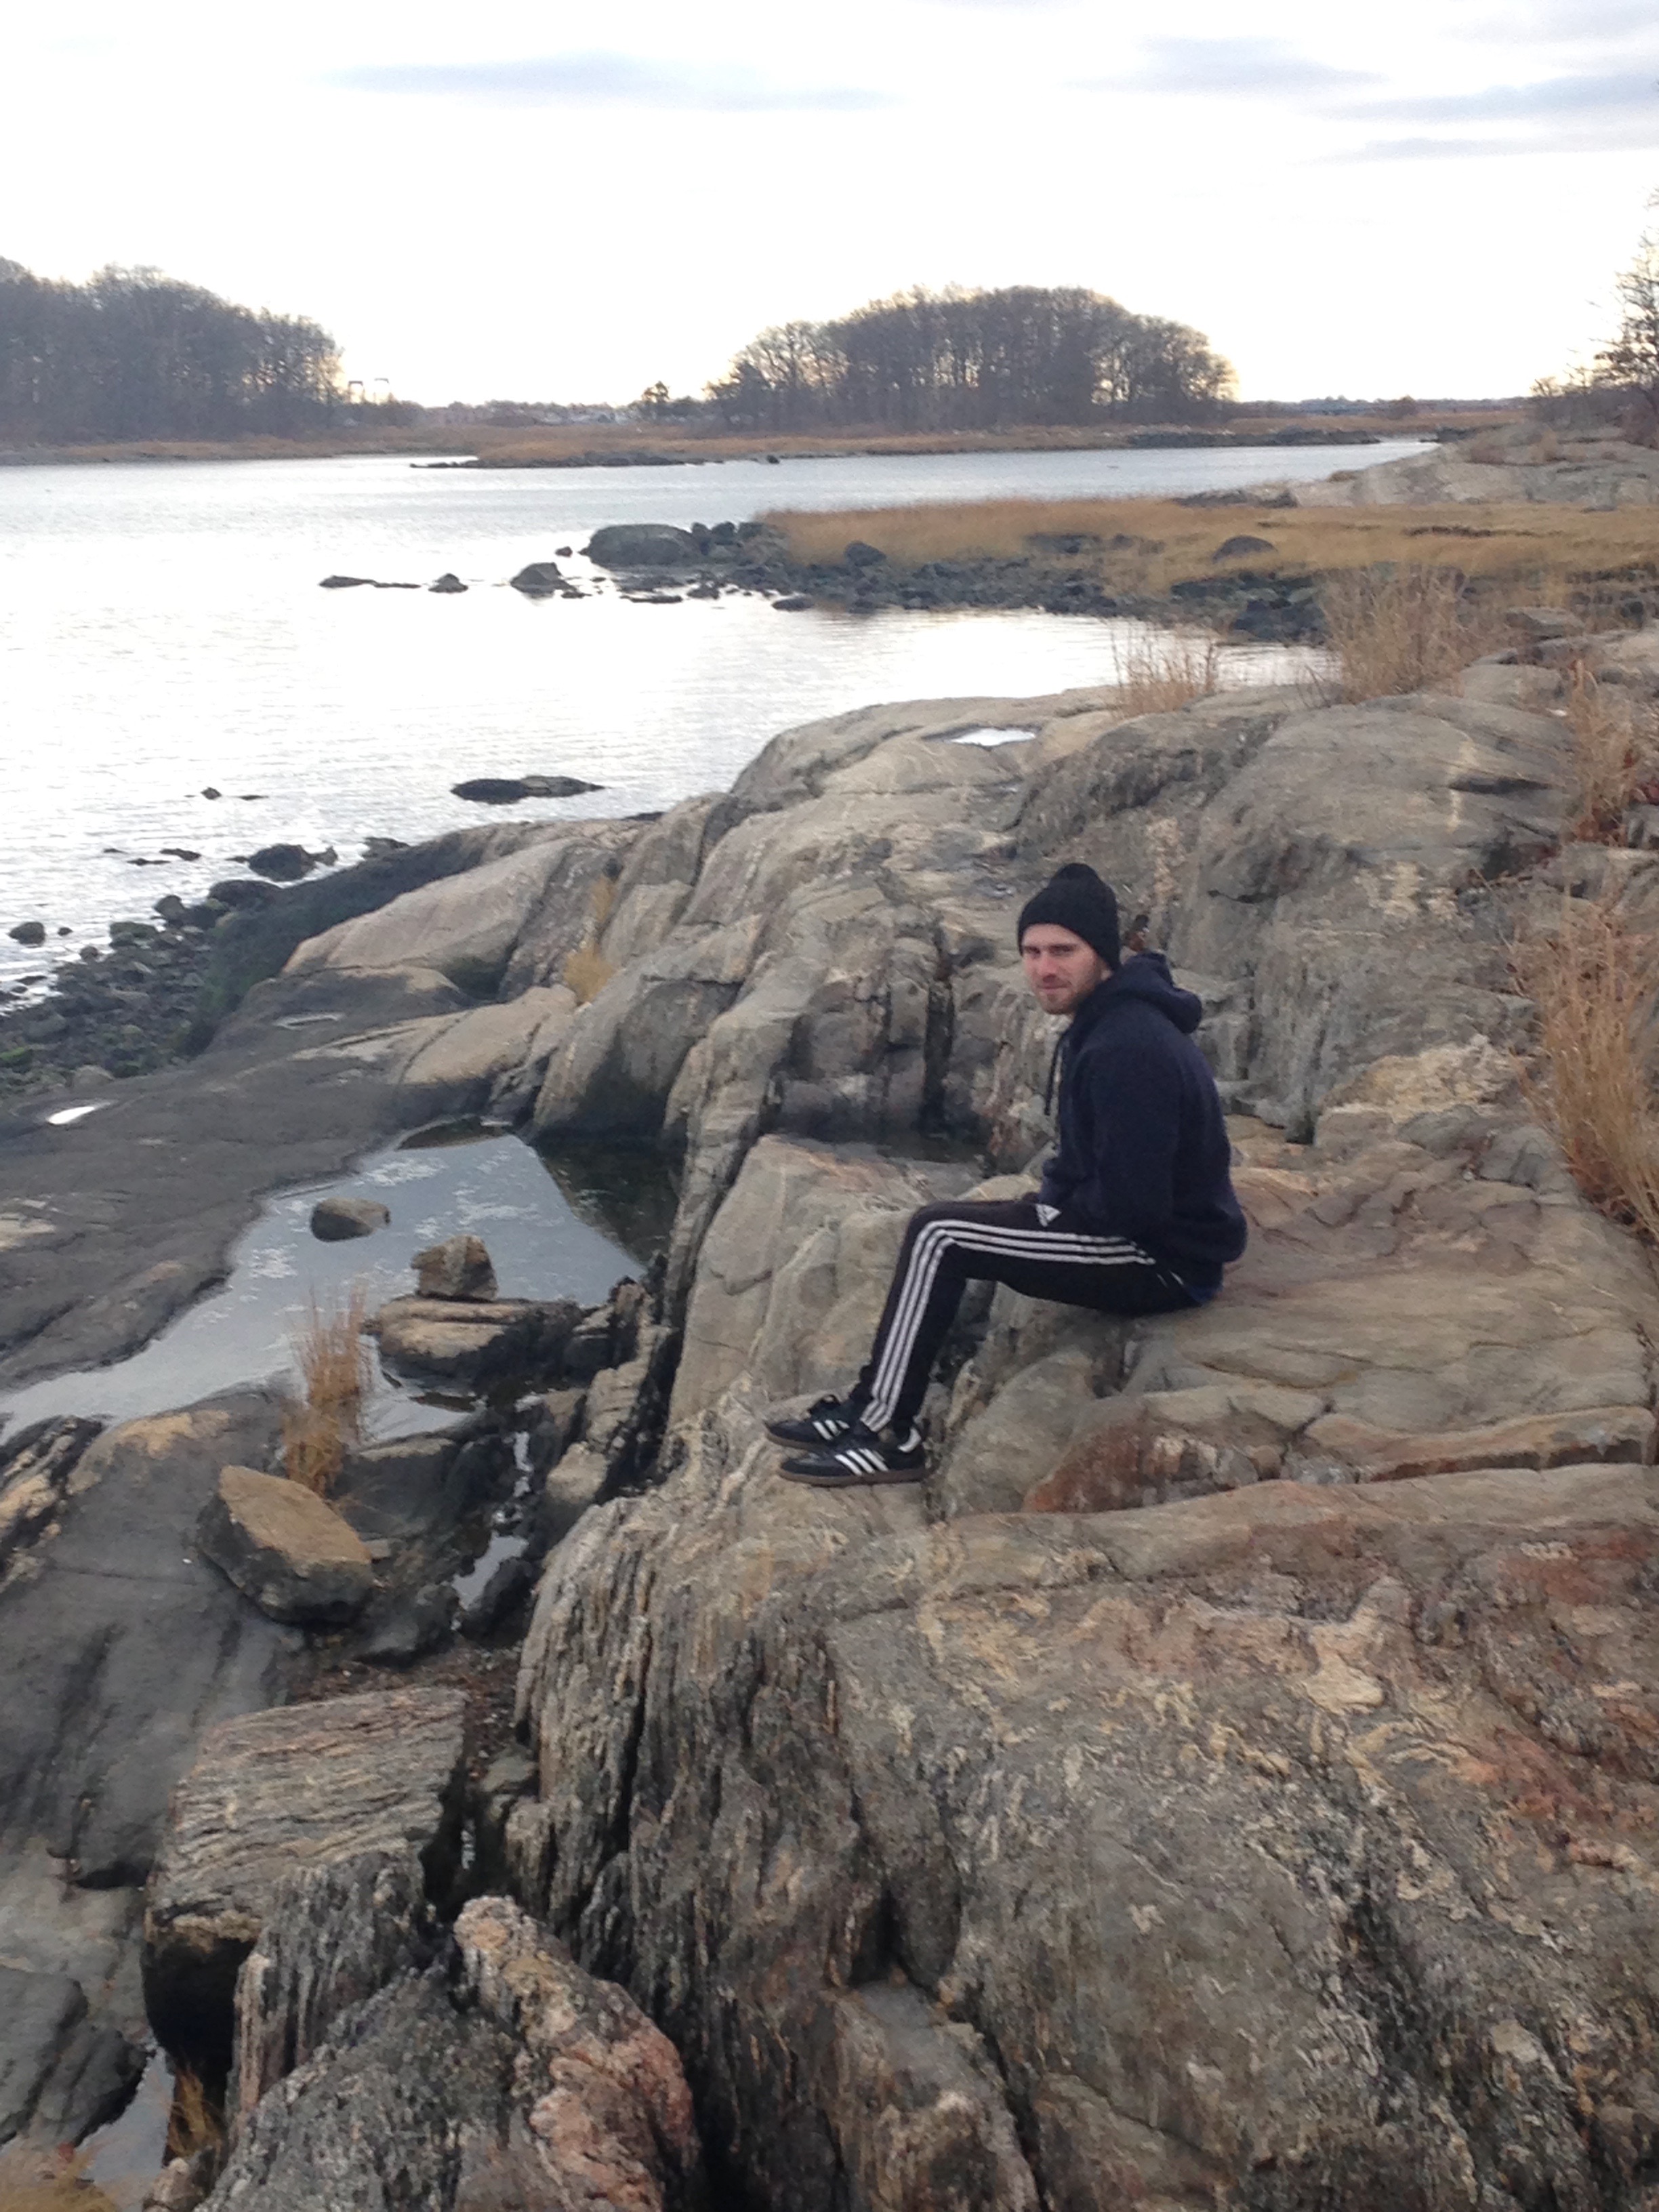 Last year's hike, son on the rocks